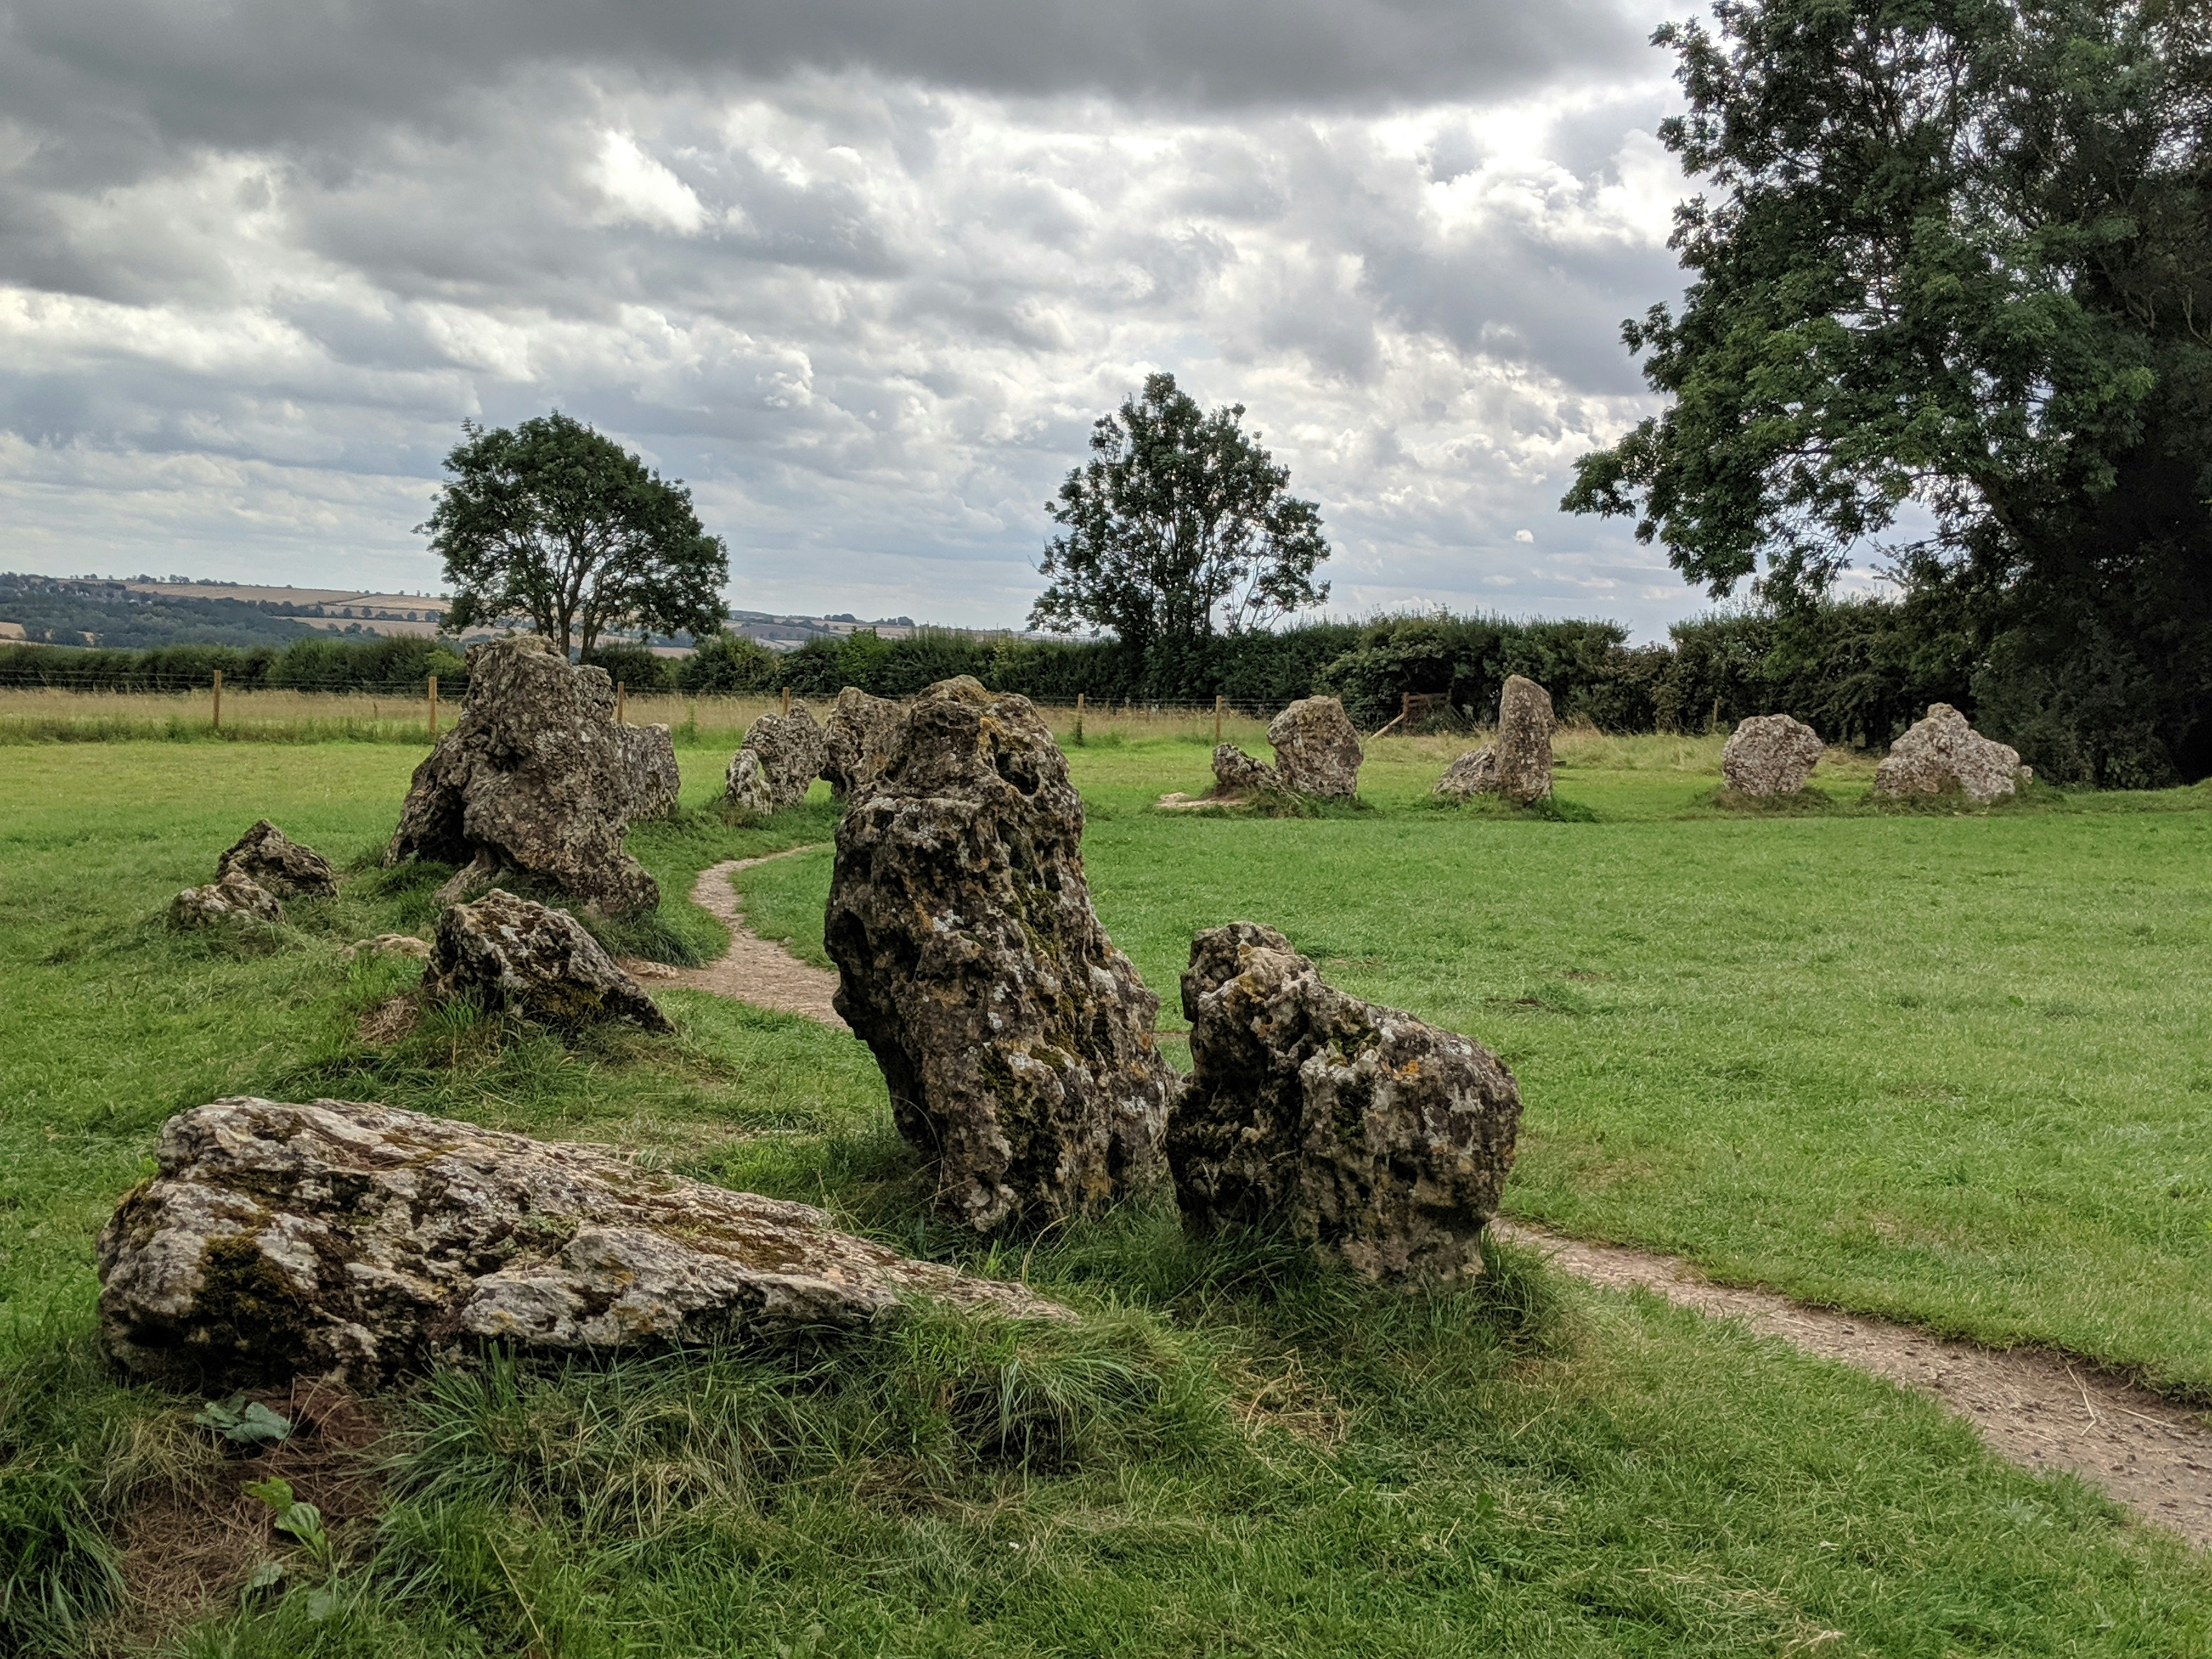 A group of standing stones in a green field on an overcast day.